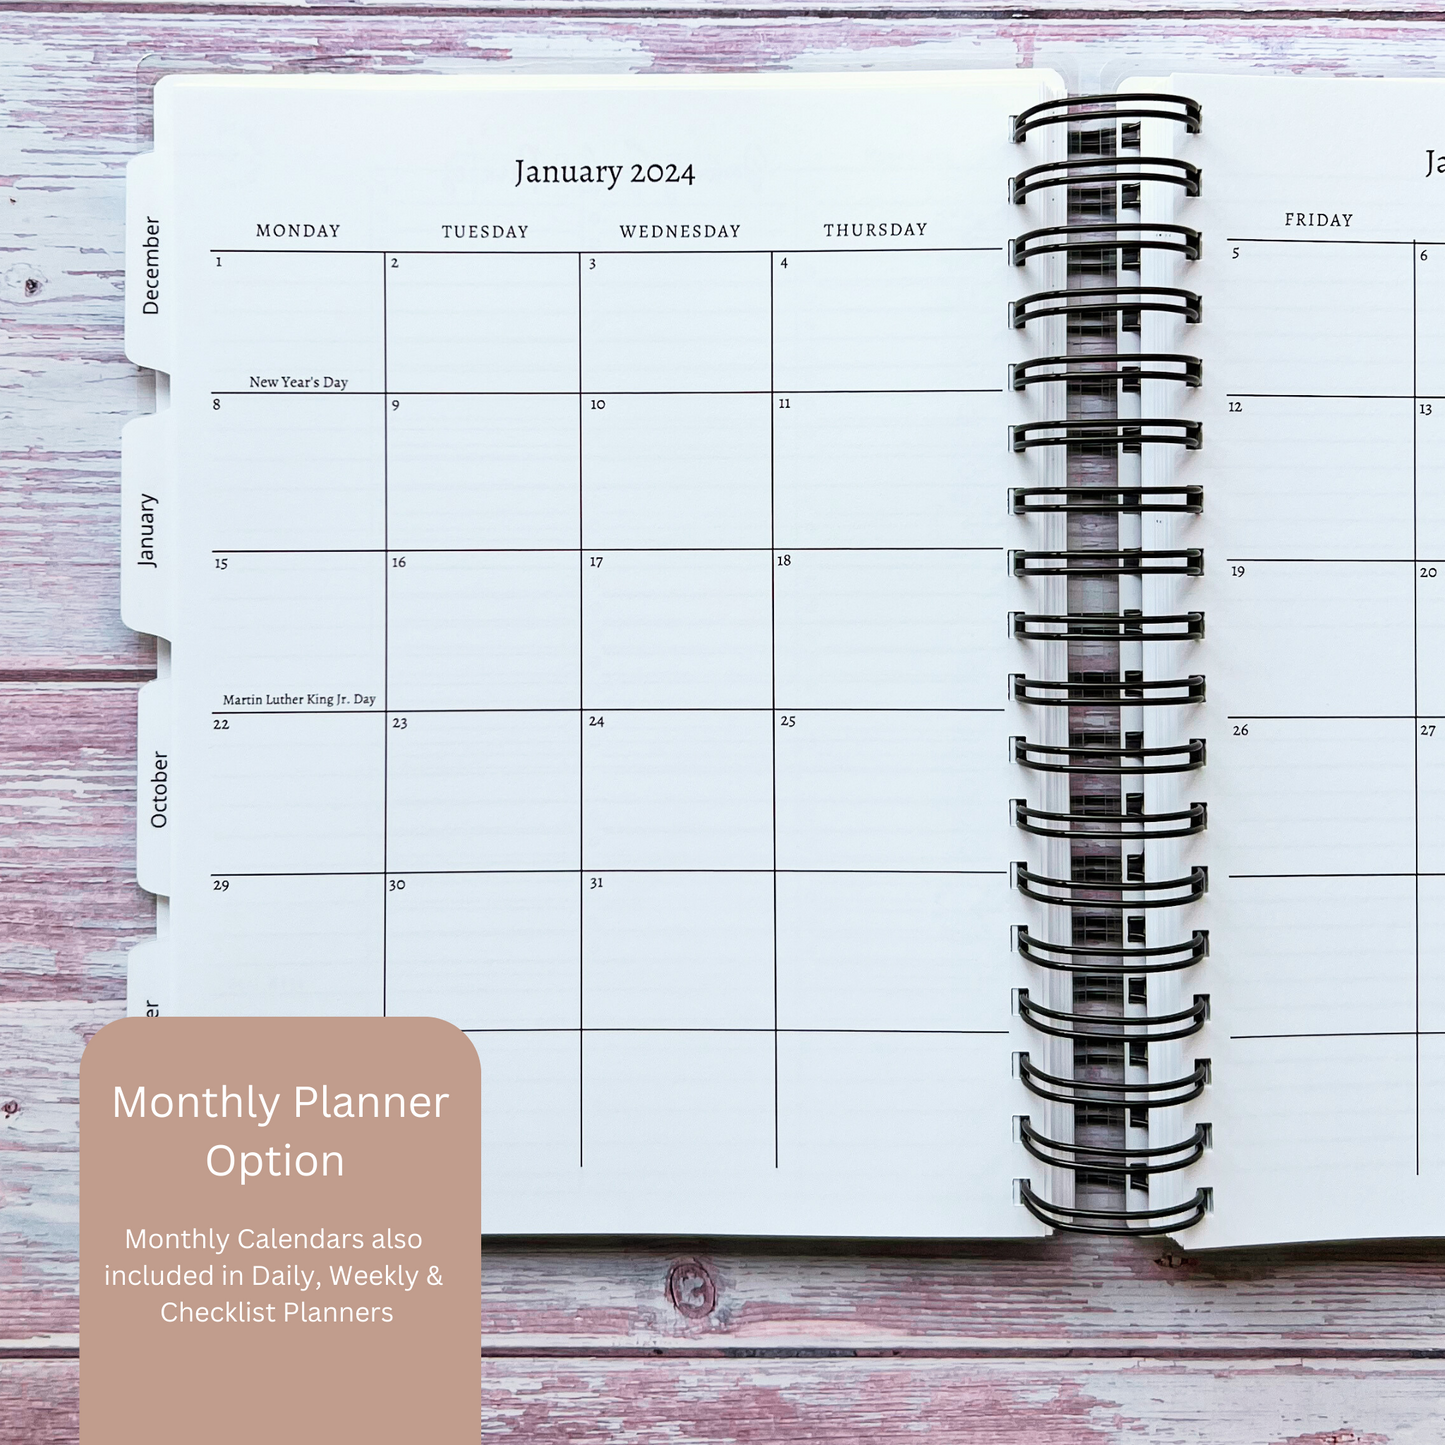 Personalized Monthly Planner - Garden Witch